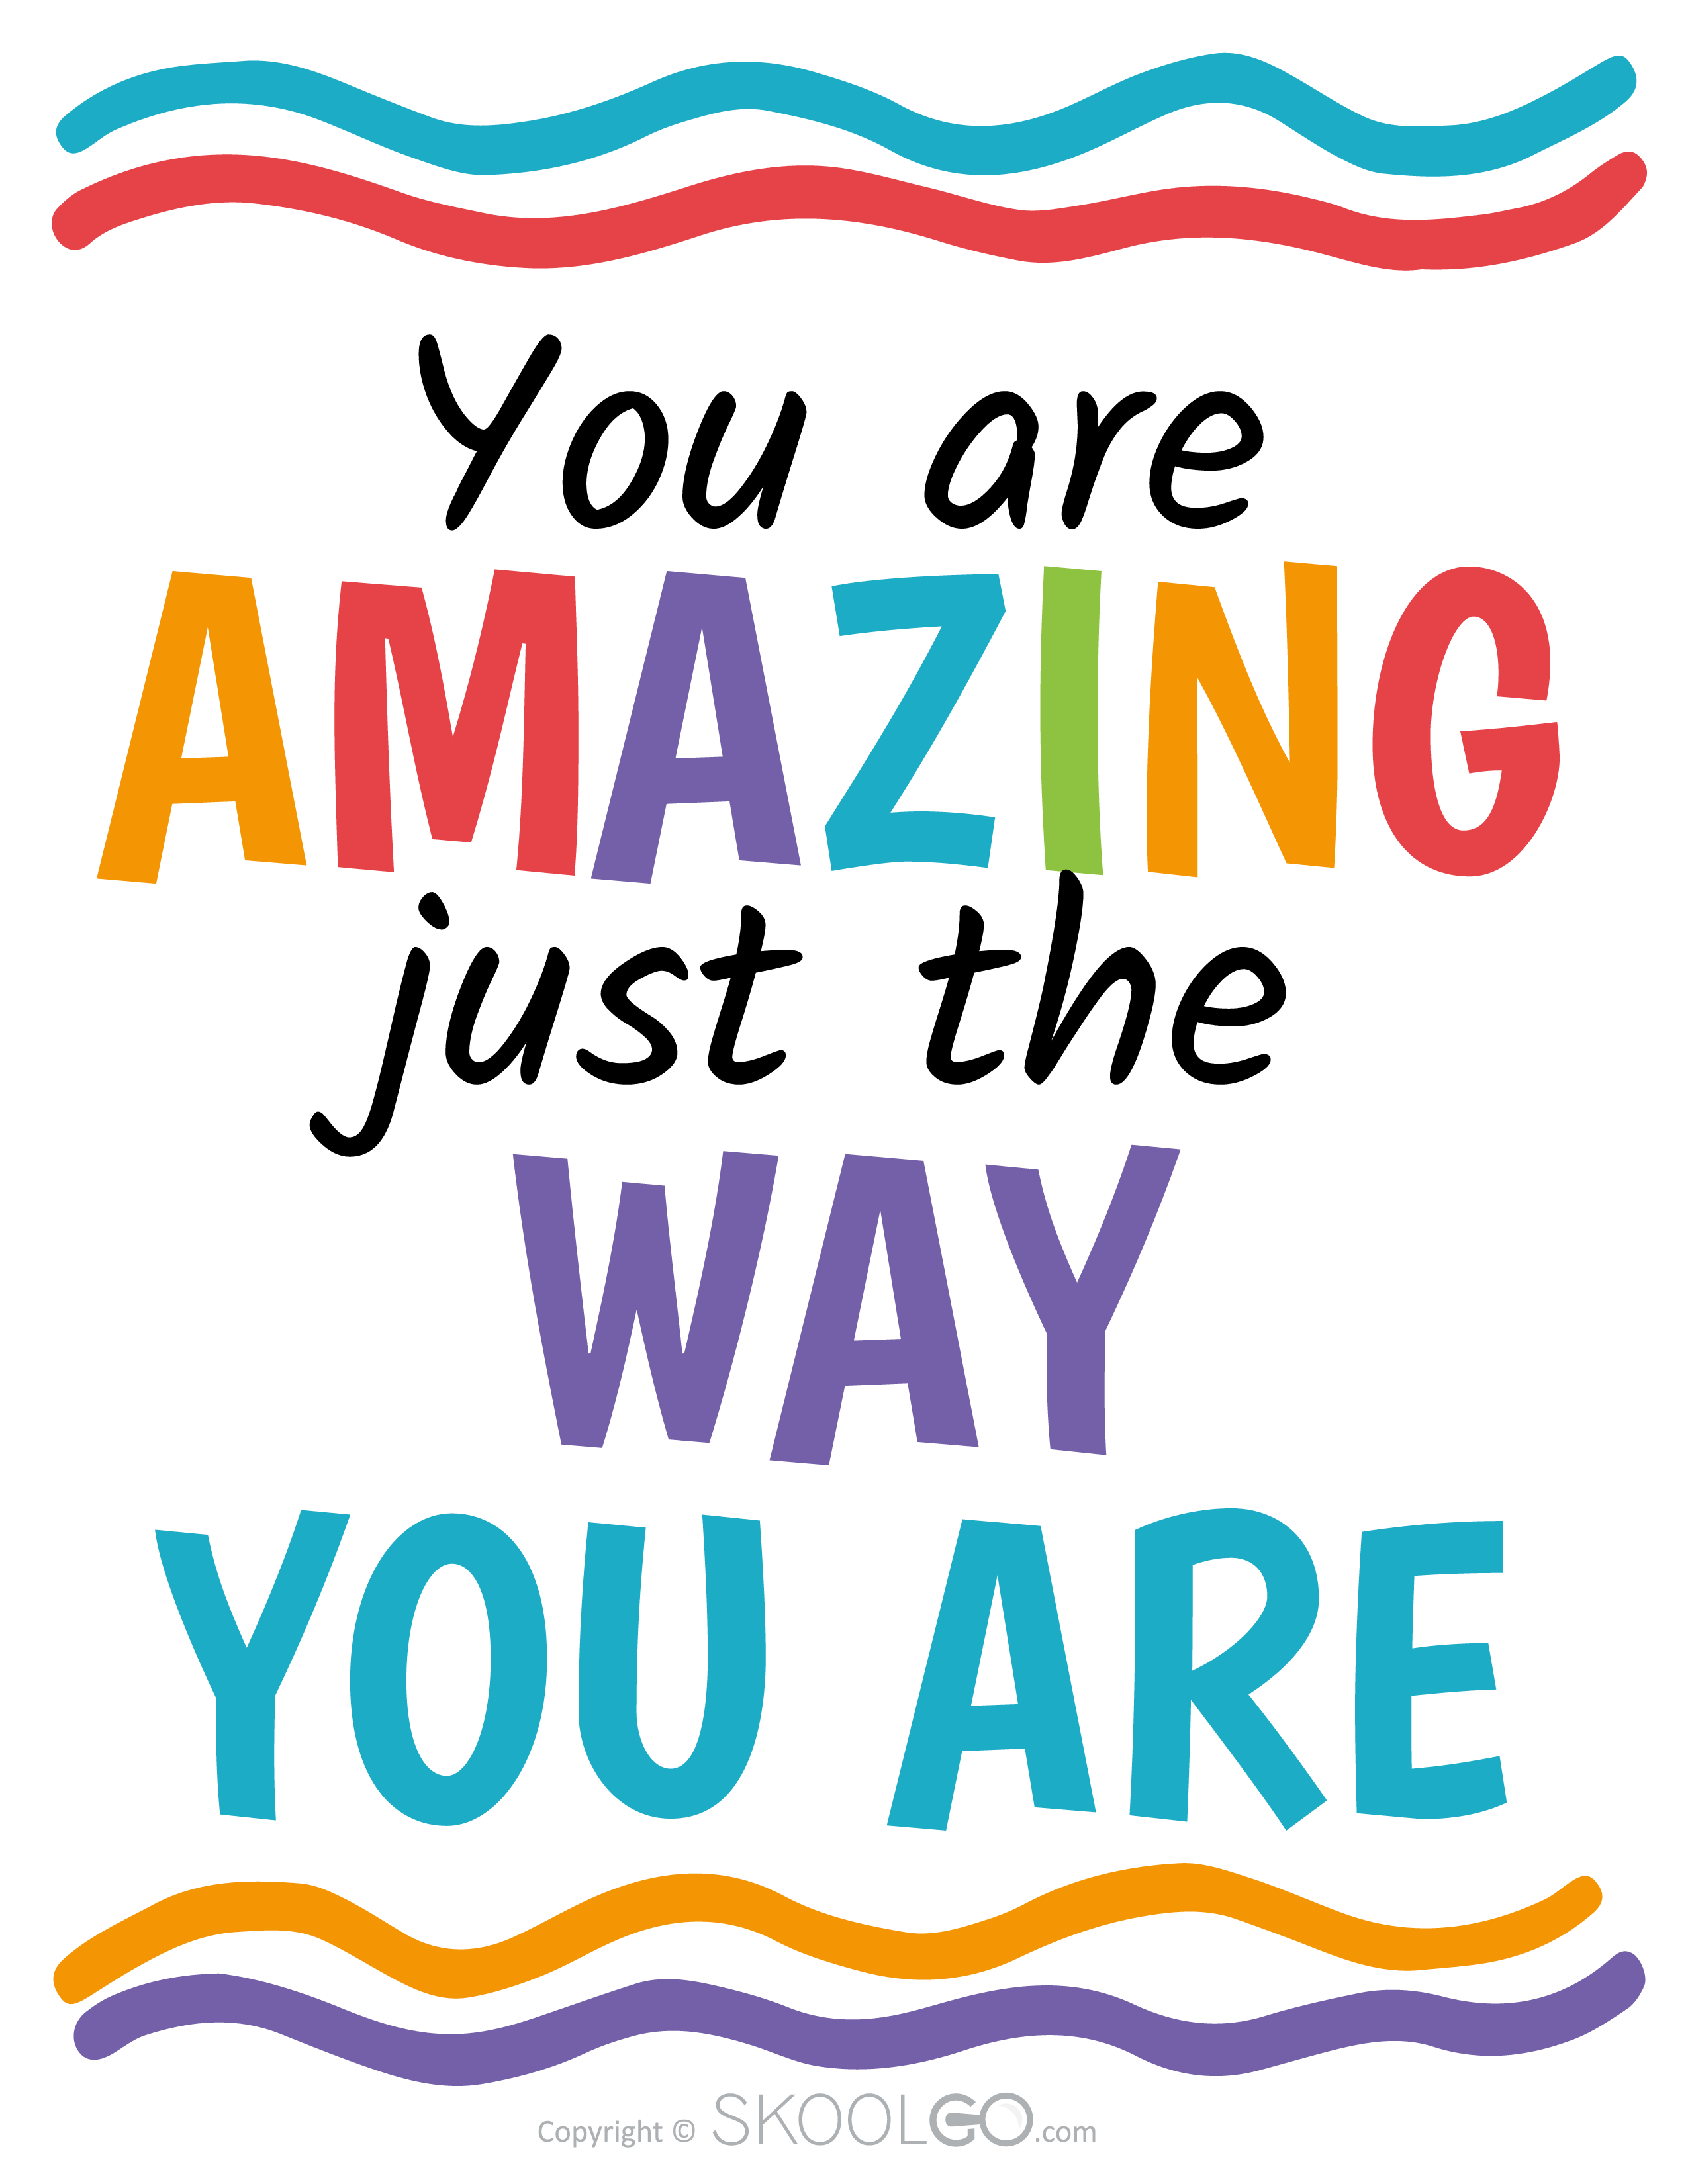 You Are Amazing Just The Way You Are - Free Classroom Poster